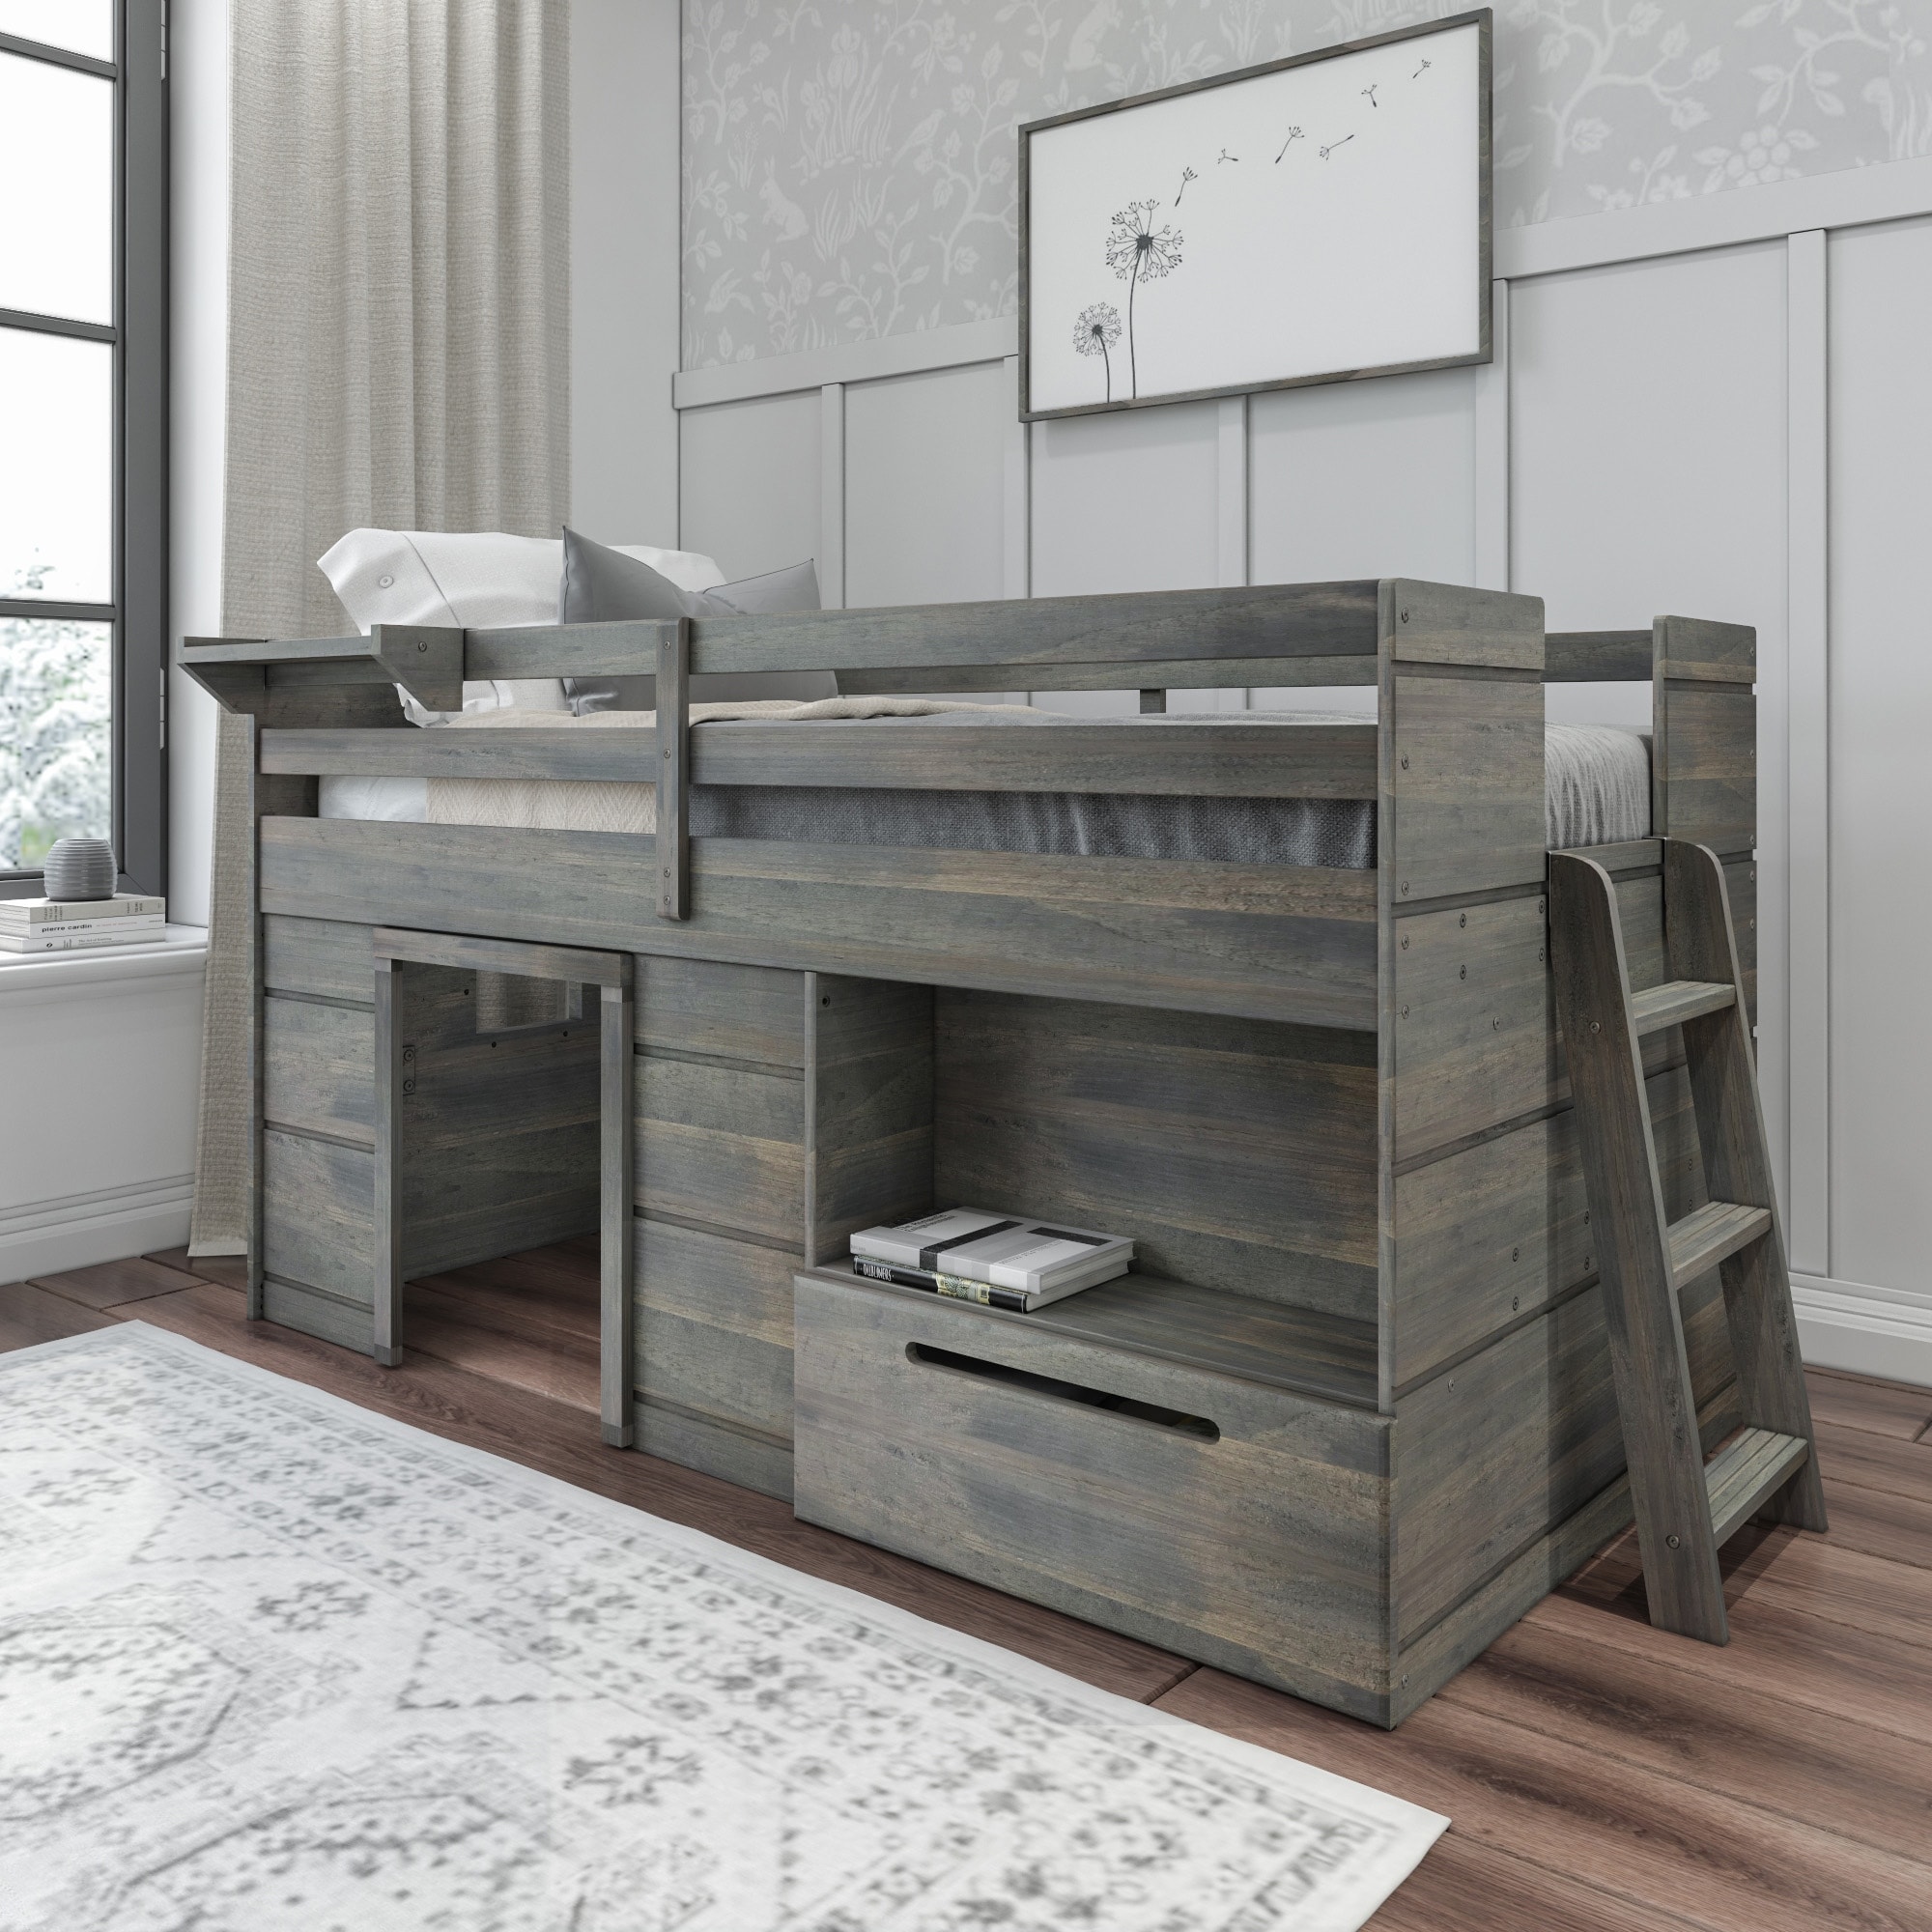 Max & Lily Modern Farmhouse Full Bed with Panel Headboard and Trundle, Driftwood